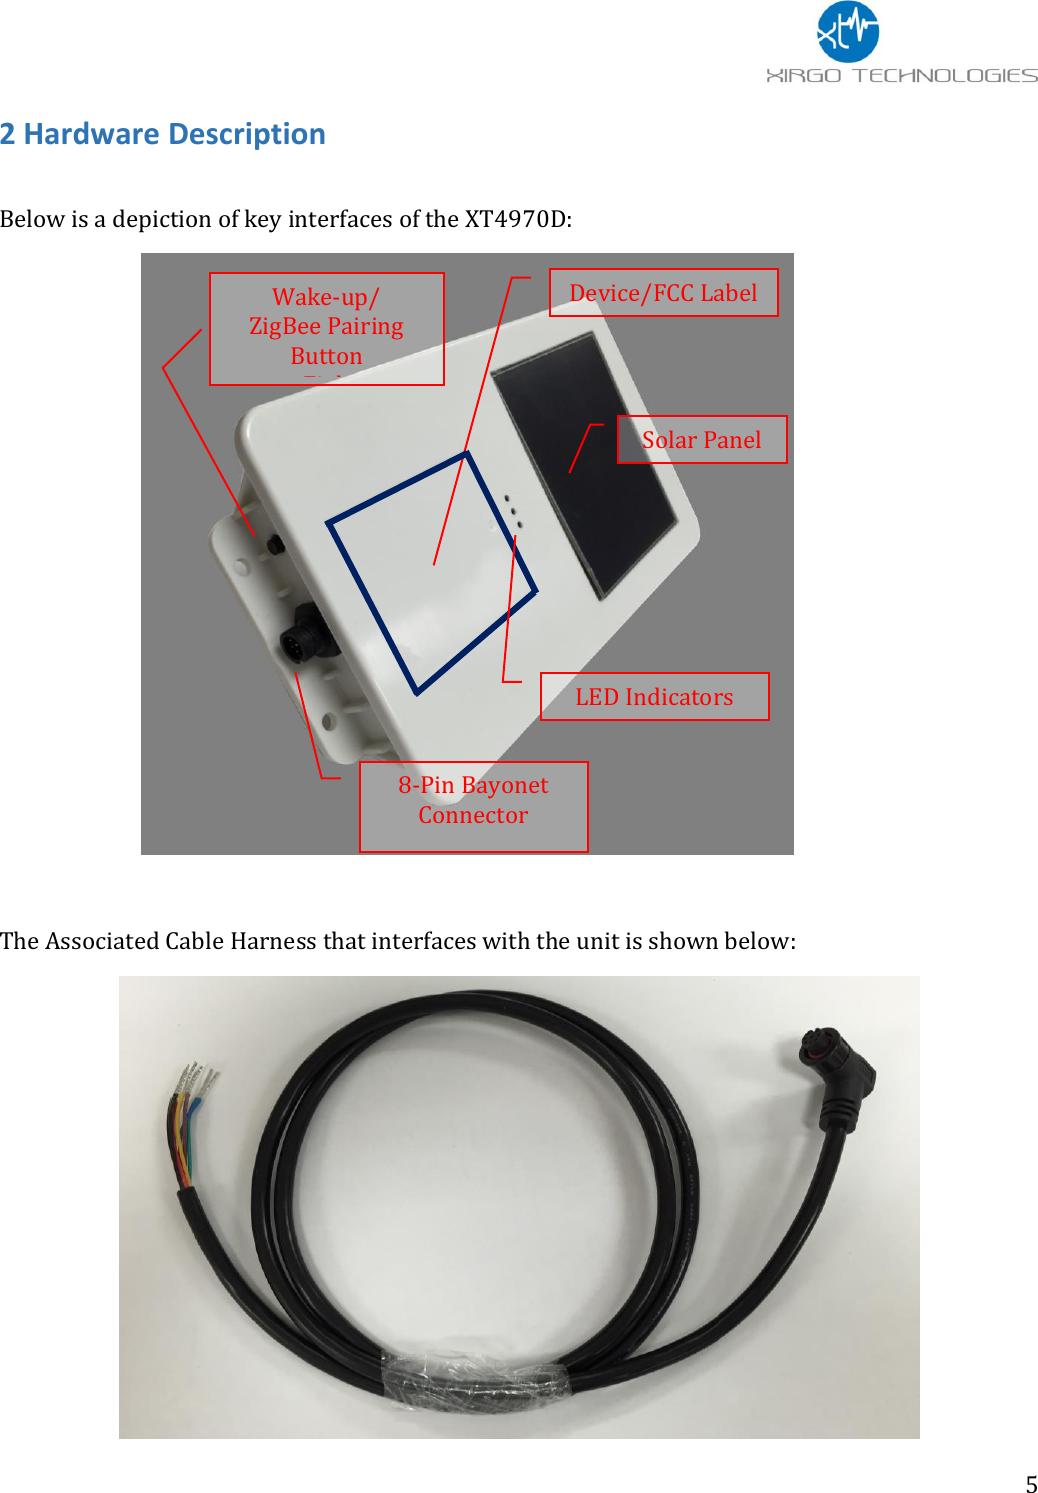                 5 2 Hardware Description    Below is a depiction of key interfaces of the XT4970D:   The Associated Cable Harness that interfaces with the unit is shown below:  Solar Panel Device/FCC Label Wake-up/ ZigBee Pairing Button Zigb 8-Pin Bayonet Connector LED Indicators 